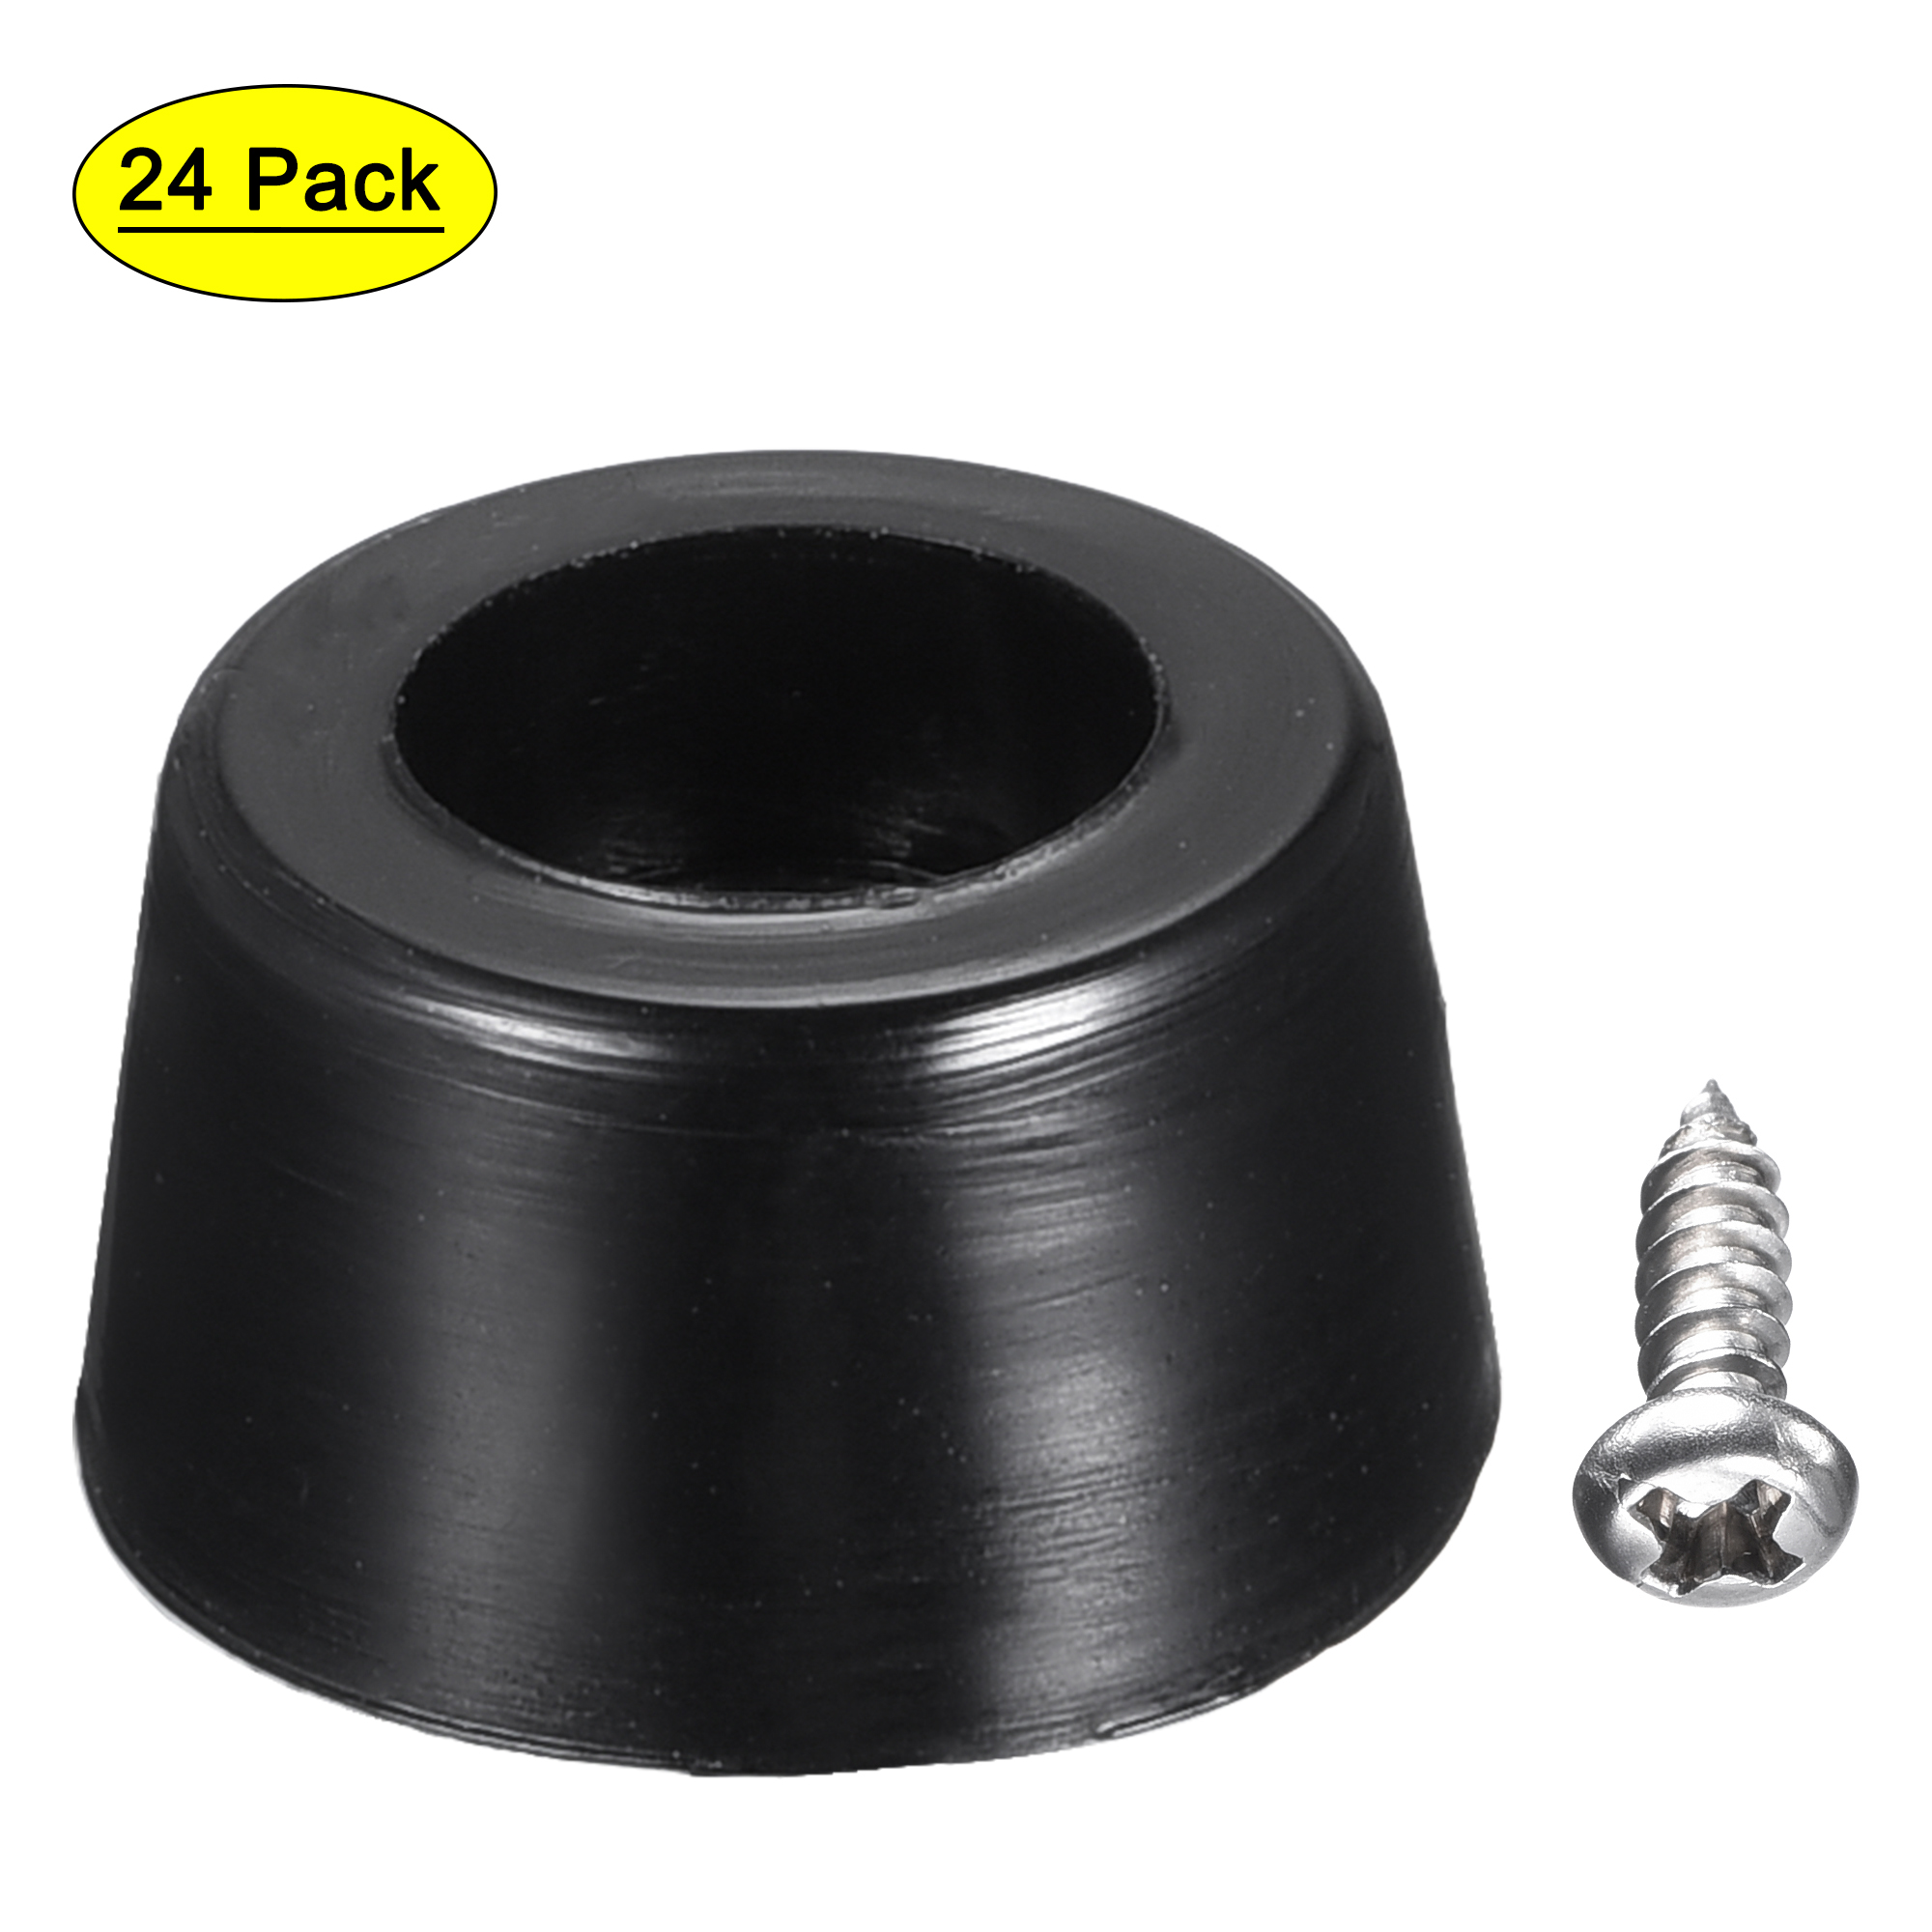 Uxcell 0.47" W x  0.28" H Rubber Bumper Feet, Stainless Steel Screws and Washer 24 Pack - image 1 of 5